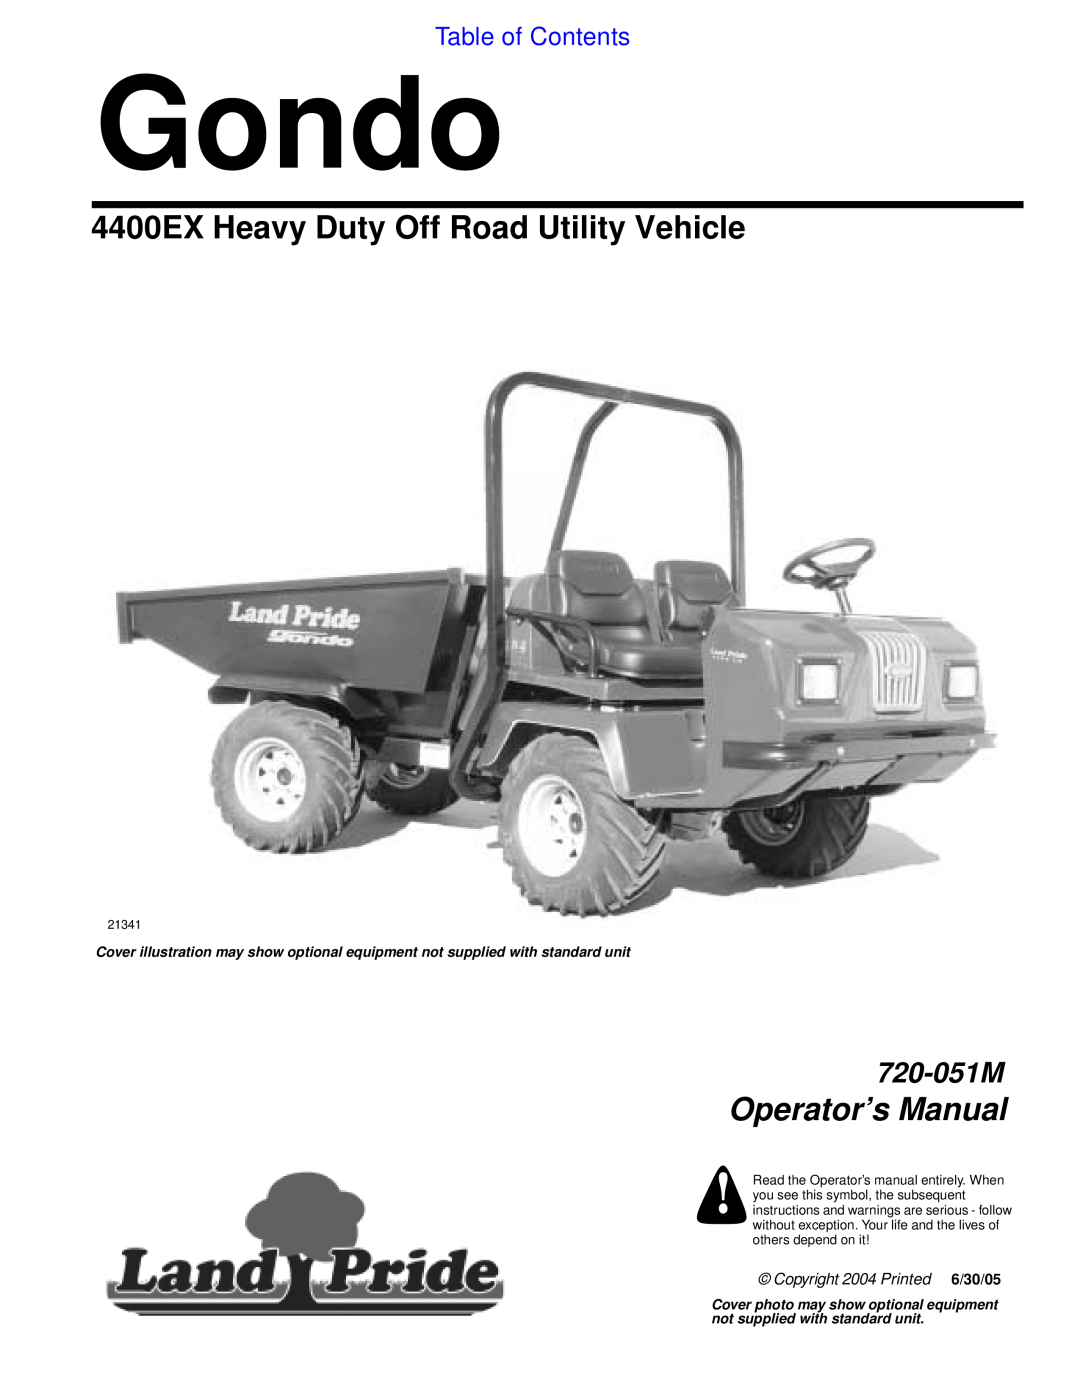 Land Pride 4400ex manual 4400EX Heavy Duty Off Road Utility Vehicle, Table of Contents, Gondo, Operator’s Manual, 720-051M 